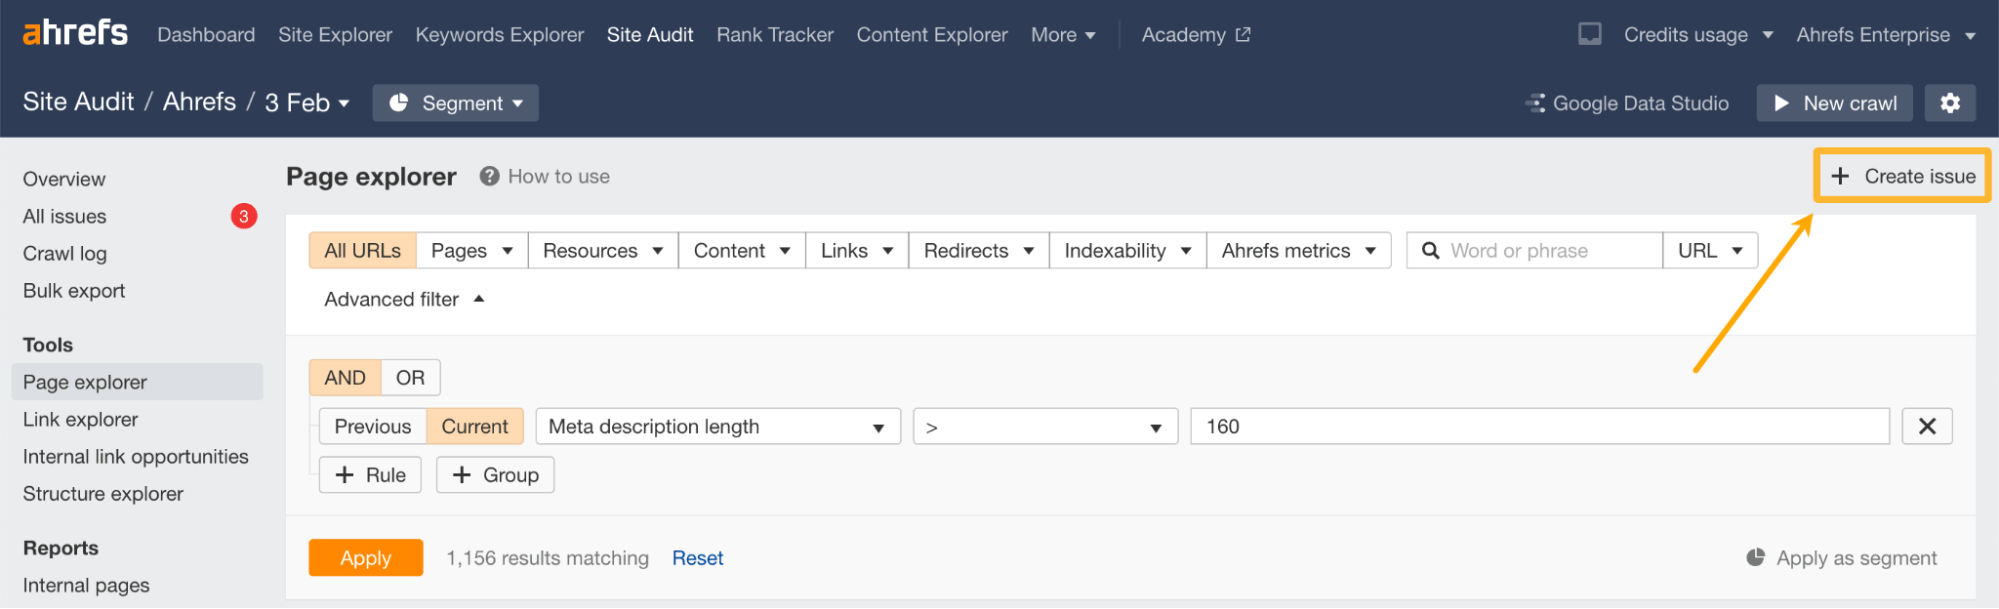 "Create issue" button under the Page explorer report, via Ahrefs' Site Audit
